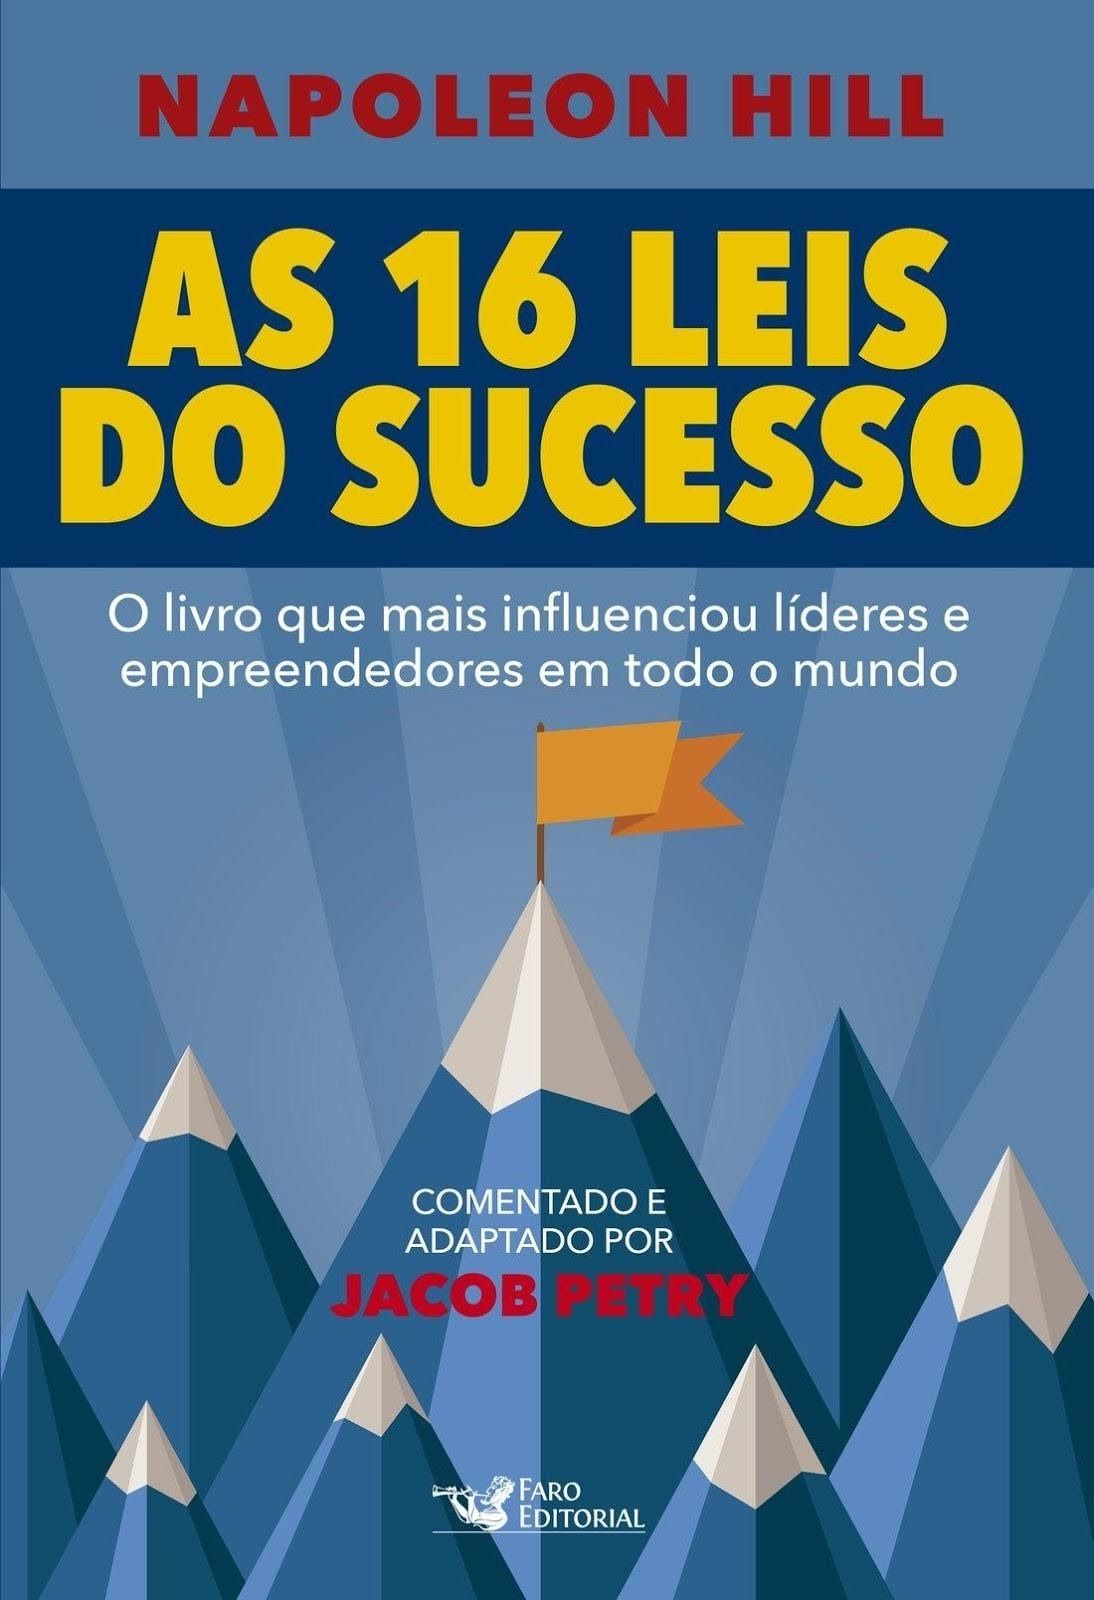 Book 'The 16 Laws of Success'